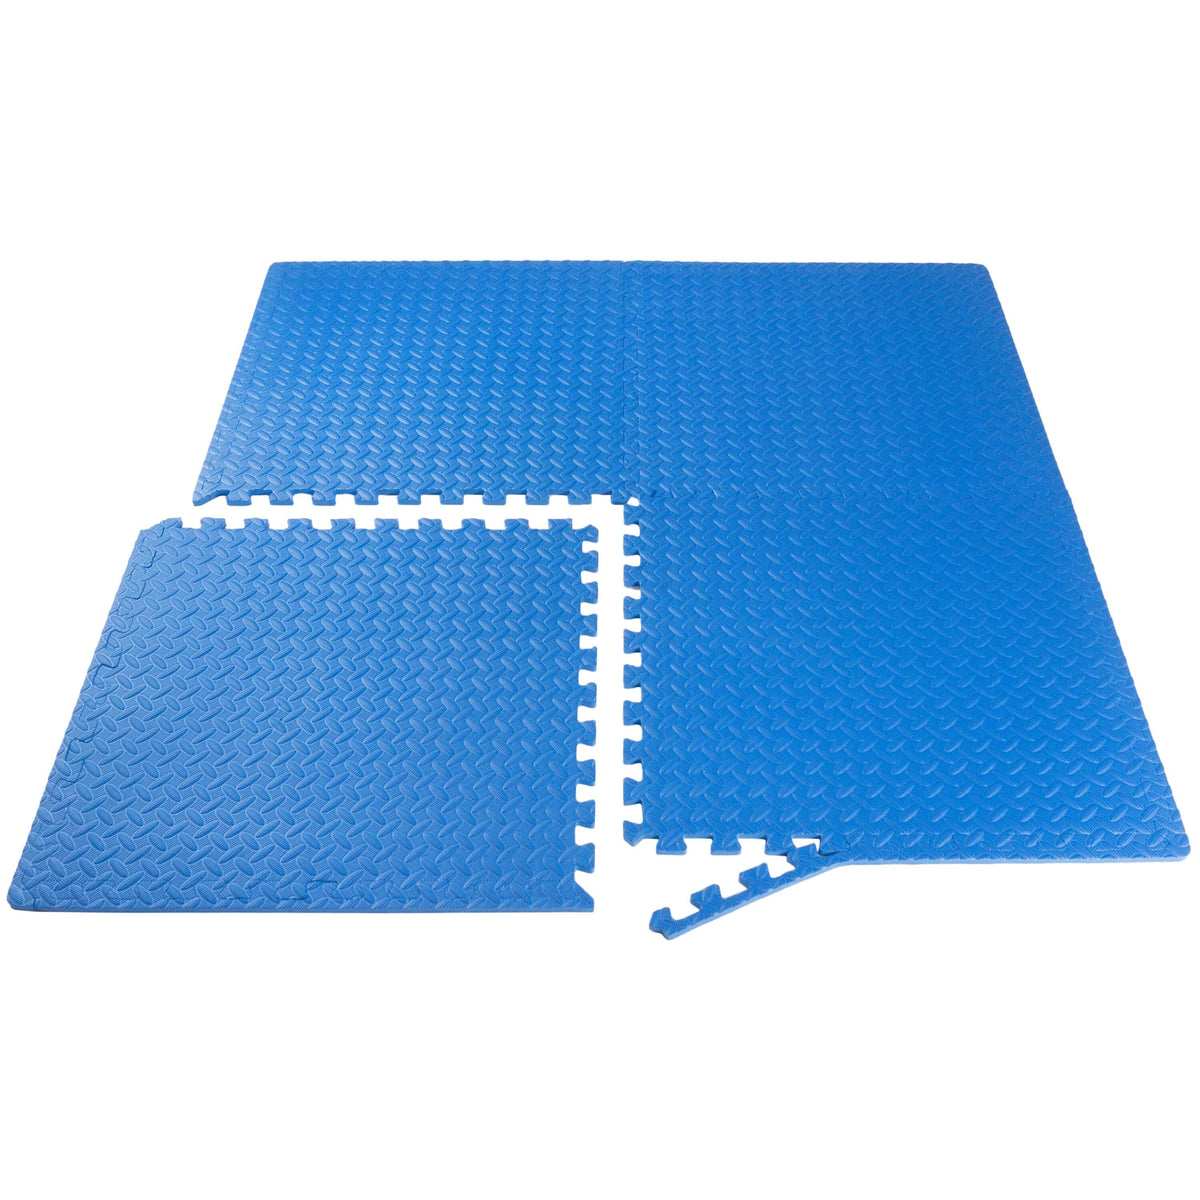 ProsourceFit Exercise Puzzle Mat  0.25" by Jupiter Gear